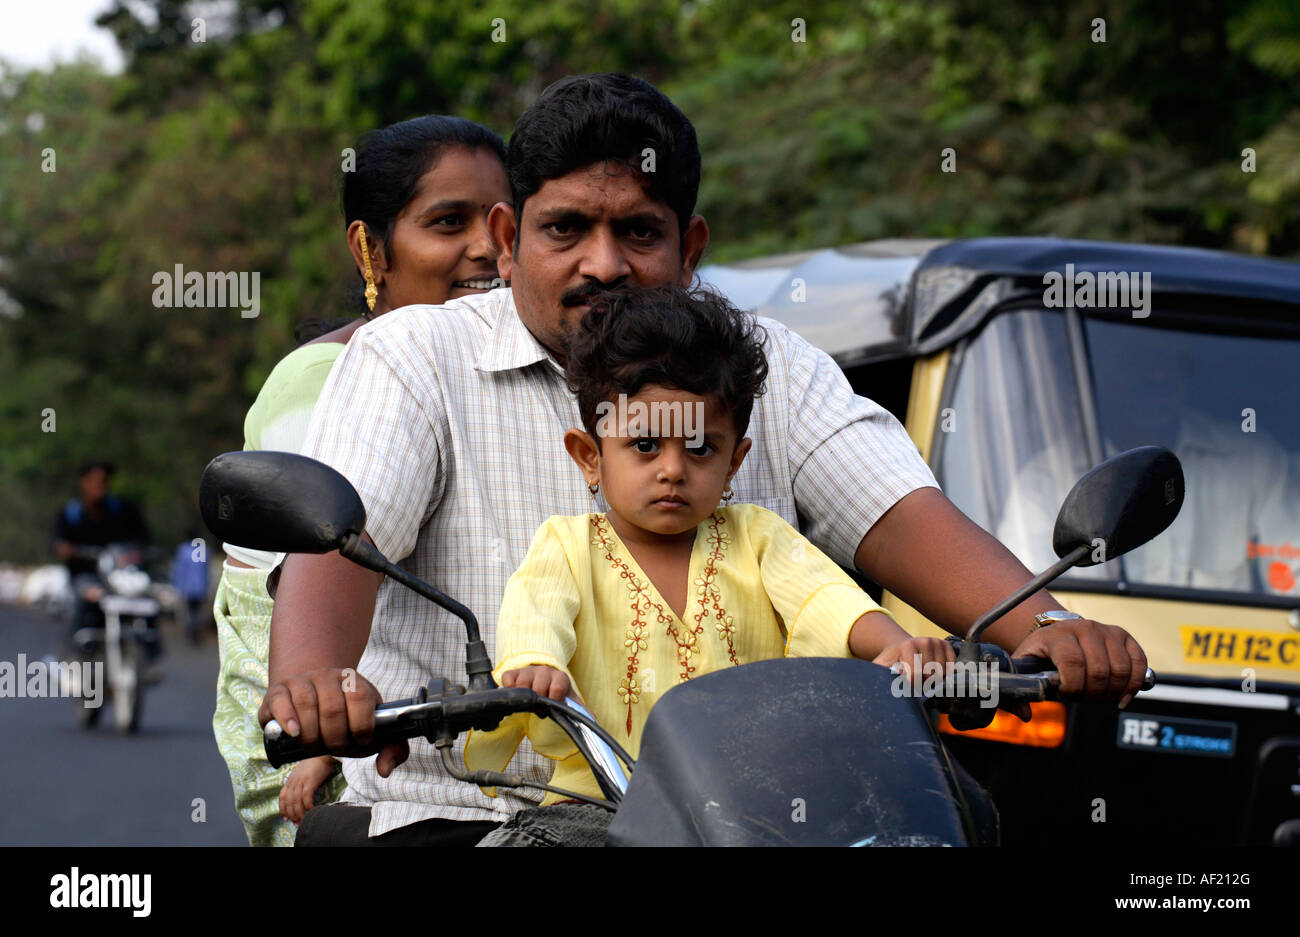 Indian family of three riding on motorbike in busy traffic without crash helmets, Pune, India Stock Photo